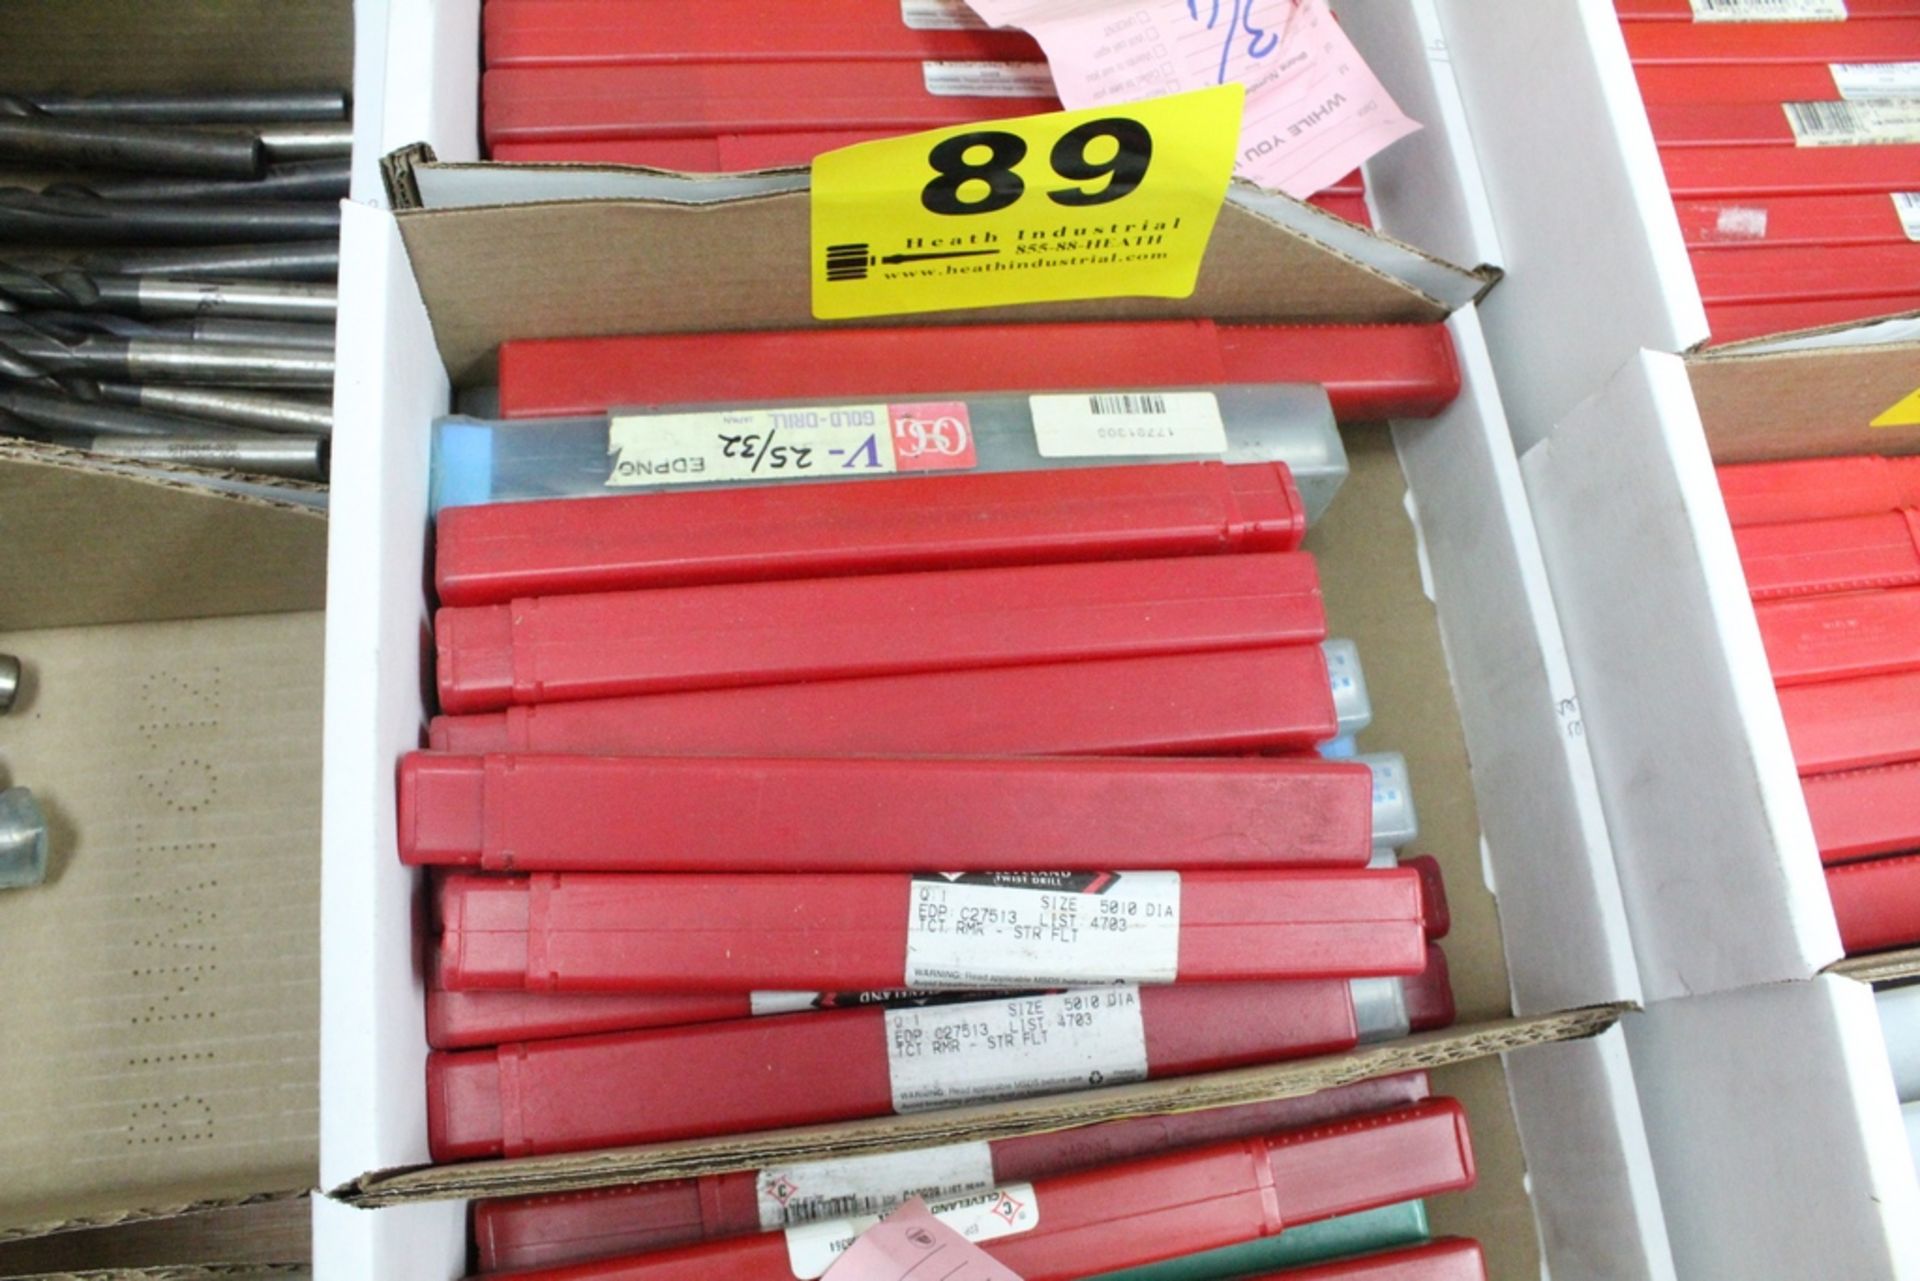 CLEVELAND COOLANT DRILLS (APPEAR NEW IN BOX)